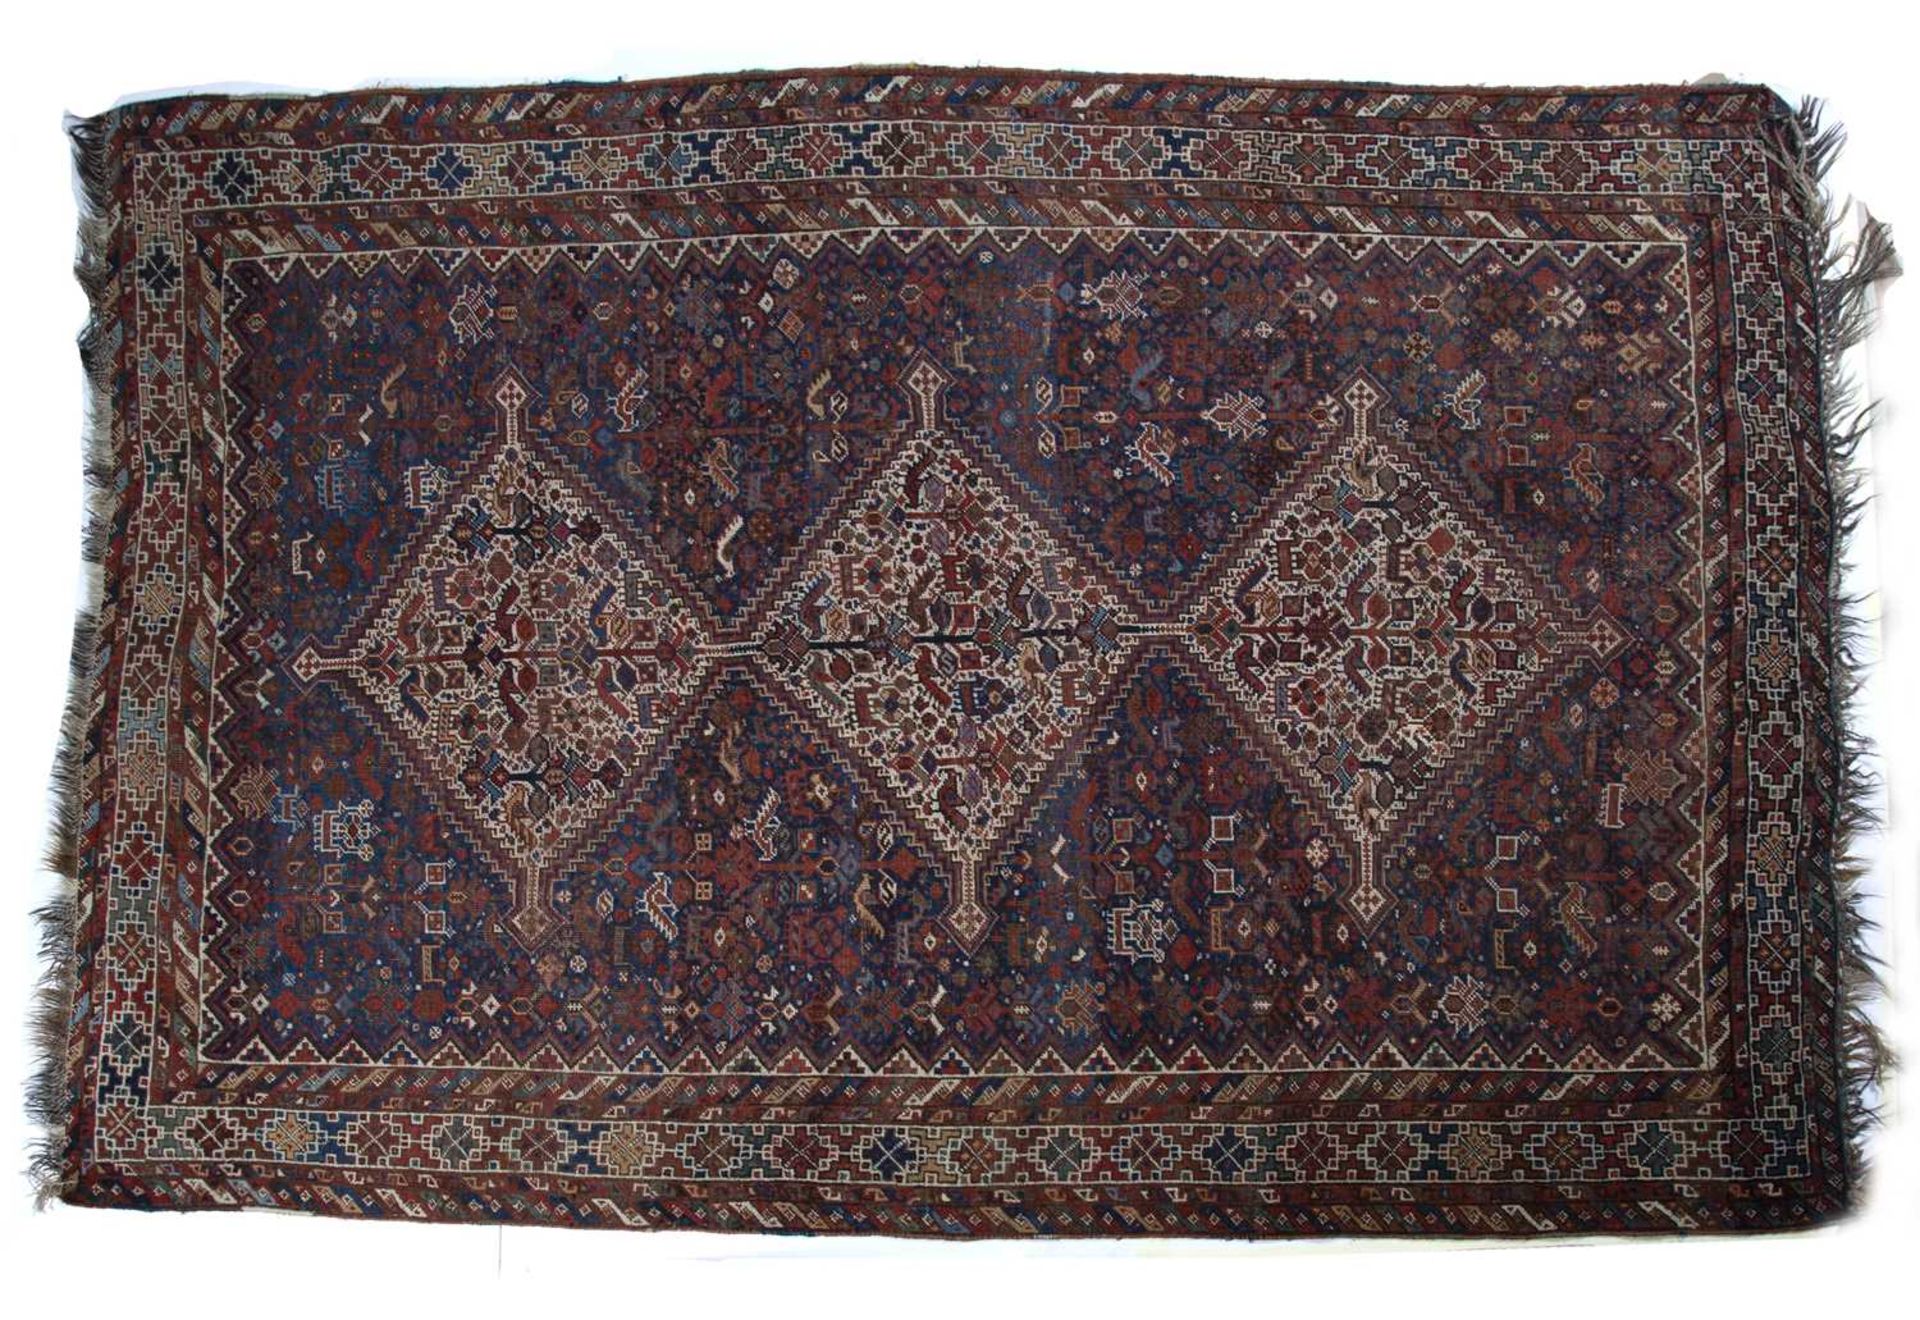 Qashqai carpet with three central medallions depicting birds and foliage, with a repeating geometric